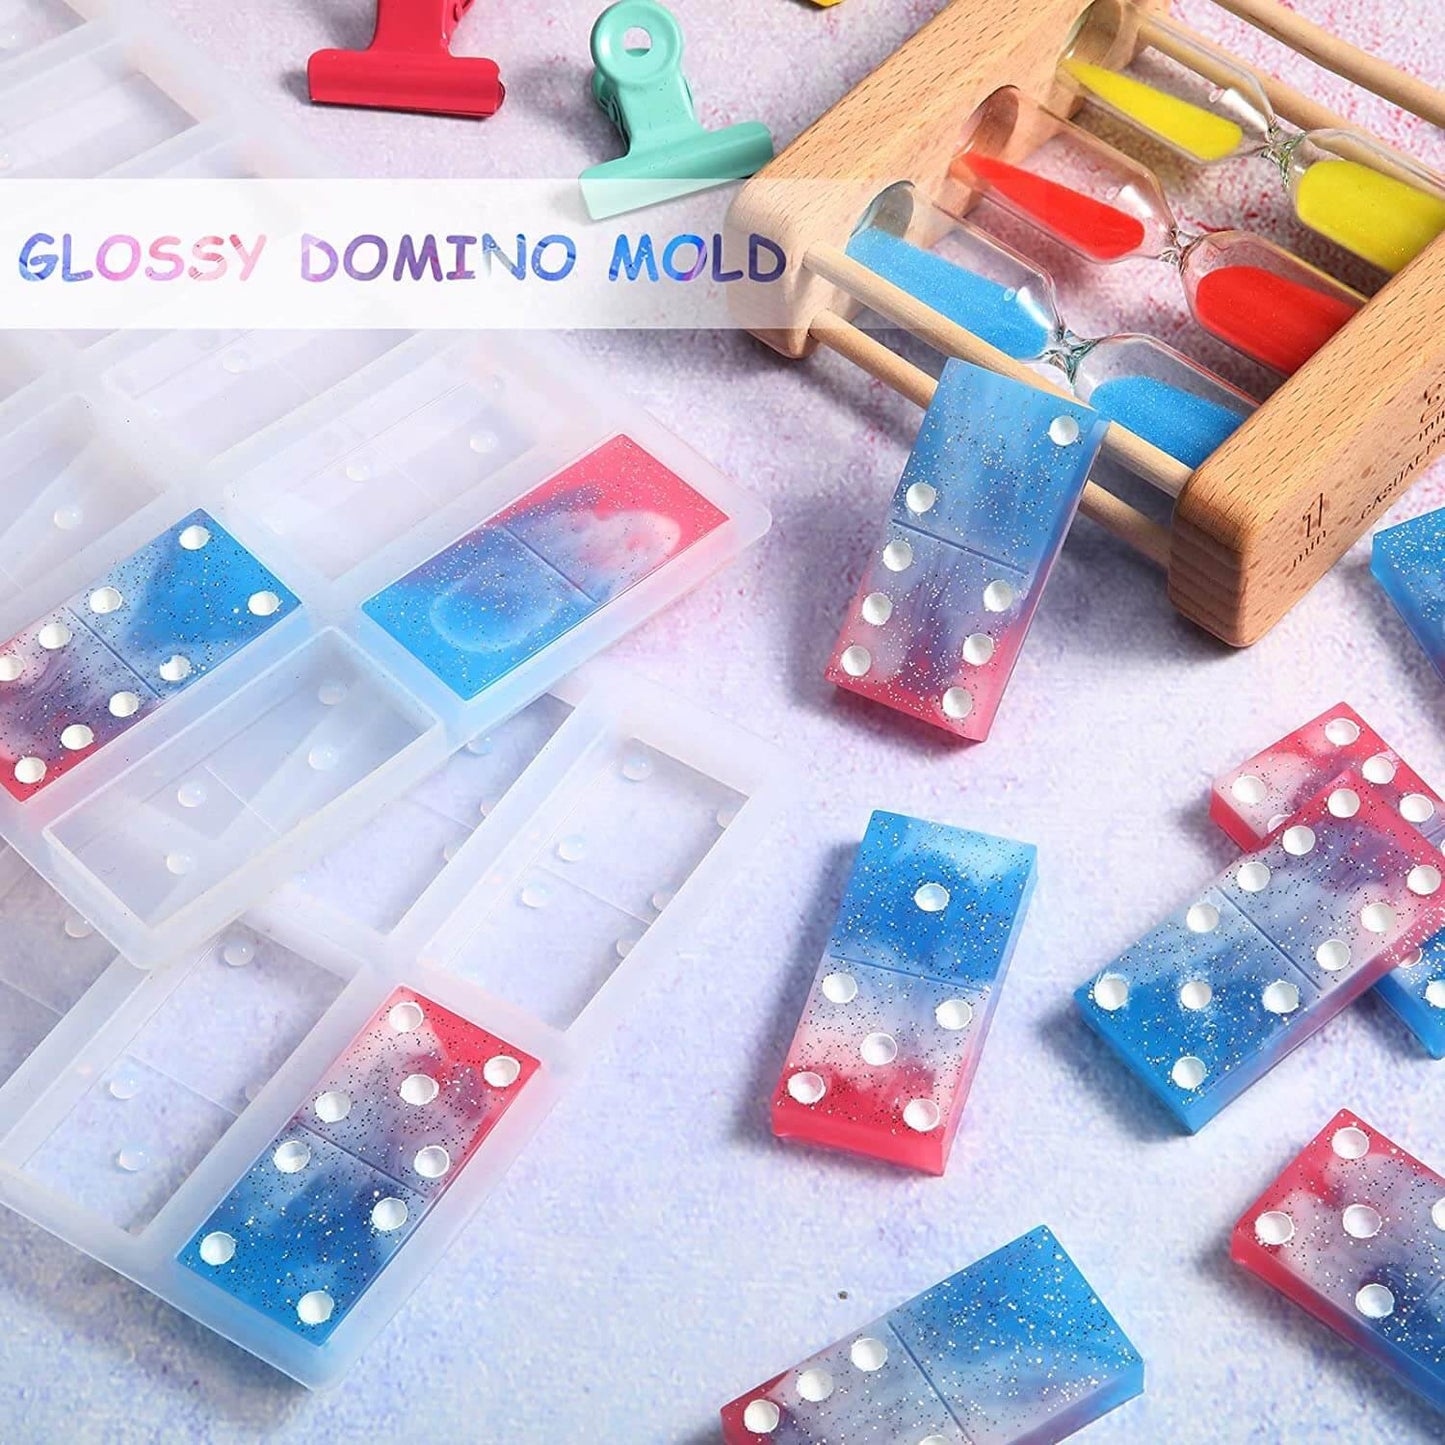 Domino Resin Molds, Domino Molds for Resin Casting, Professional